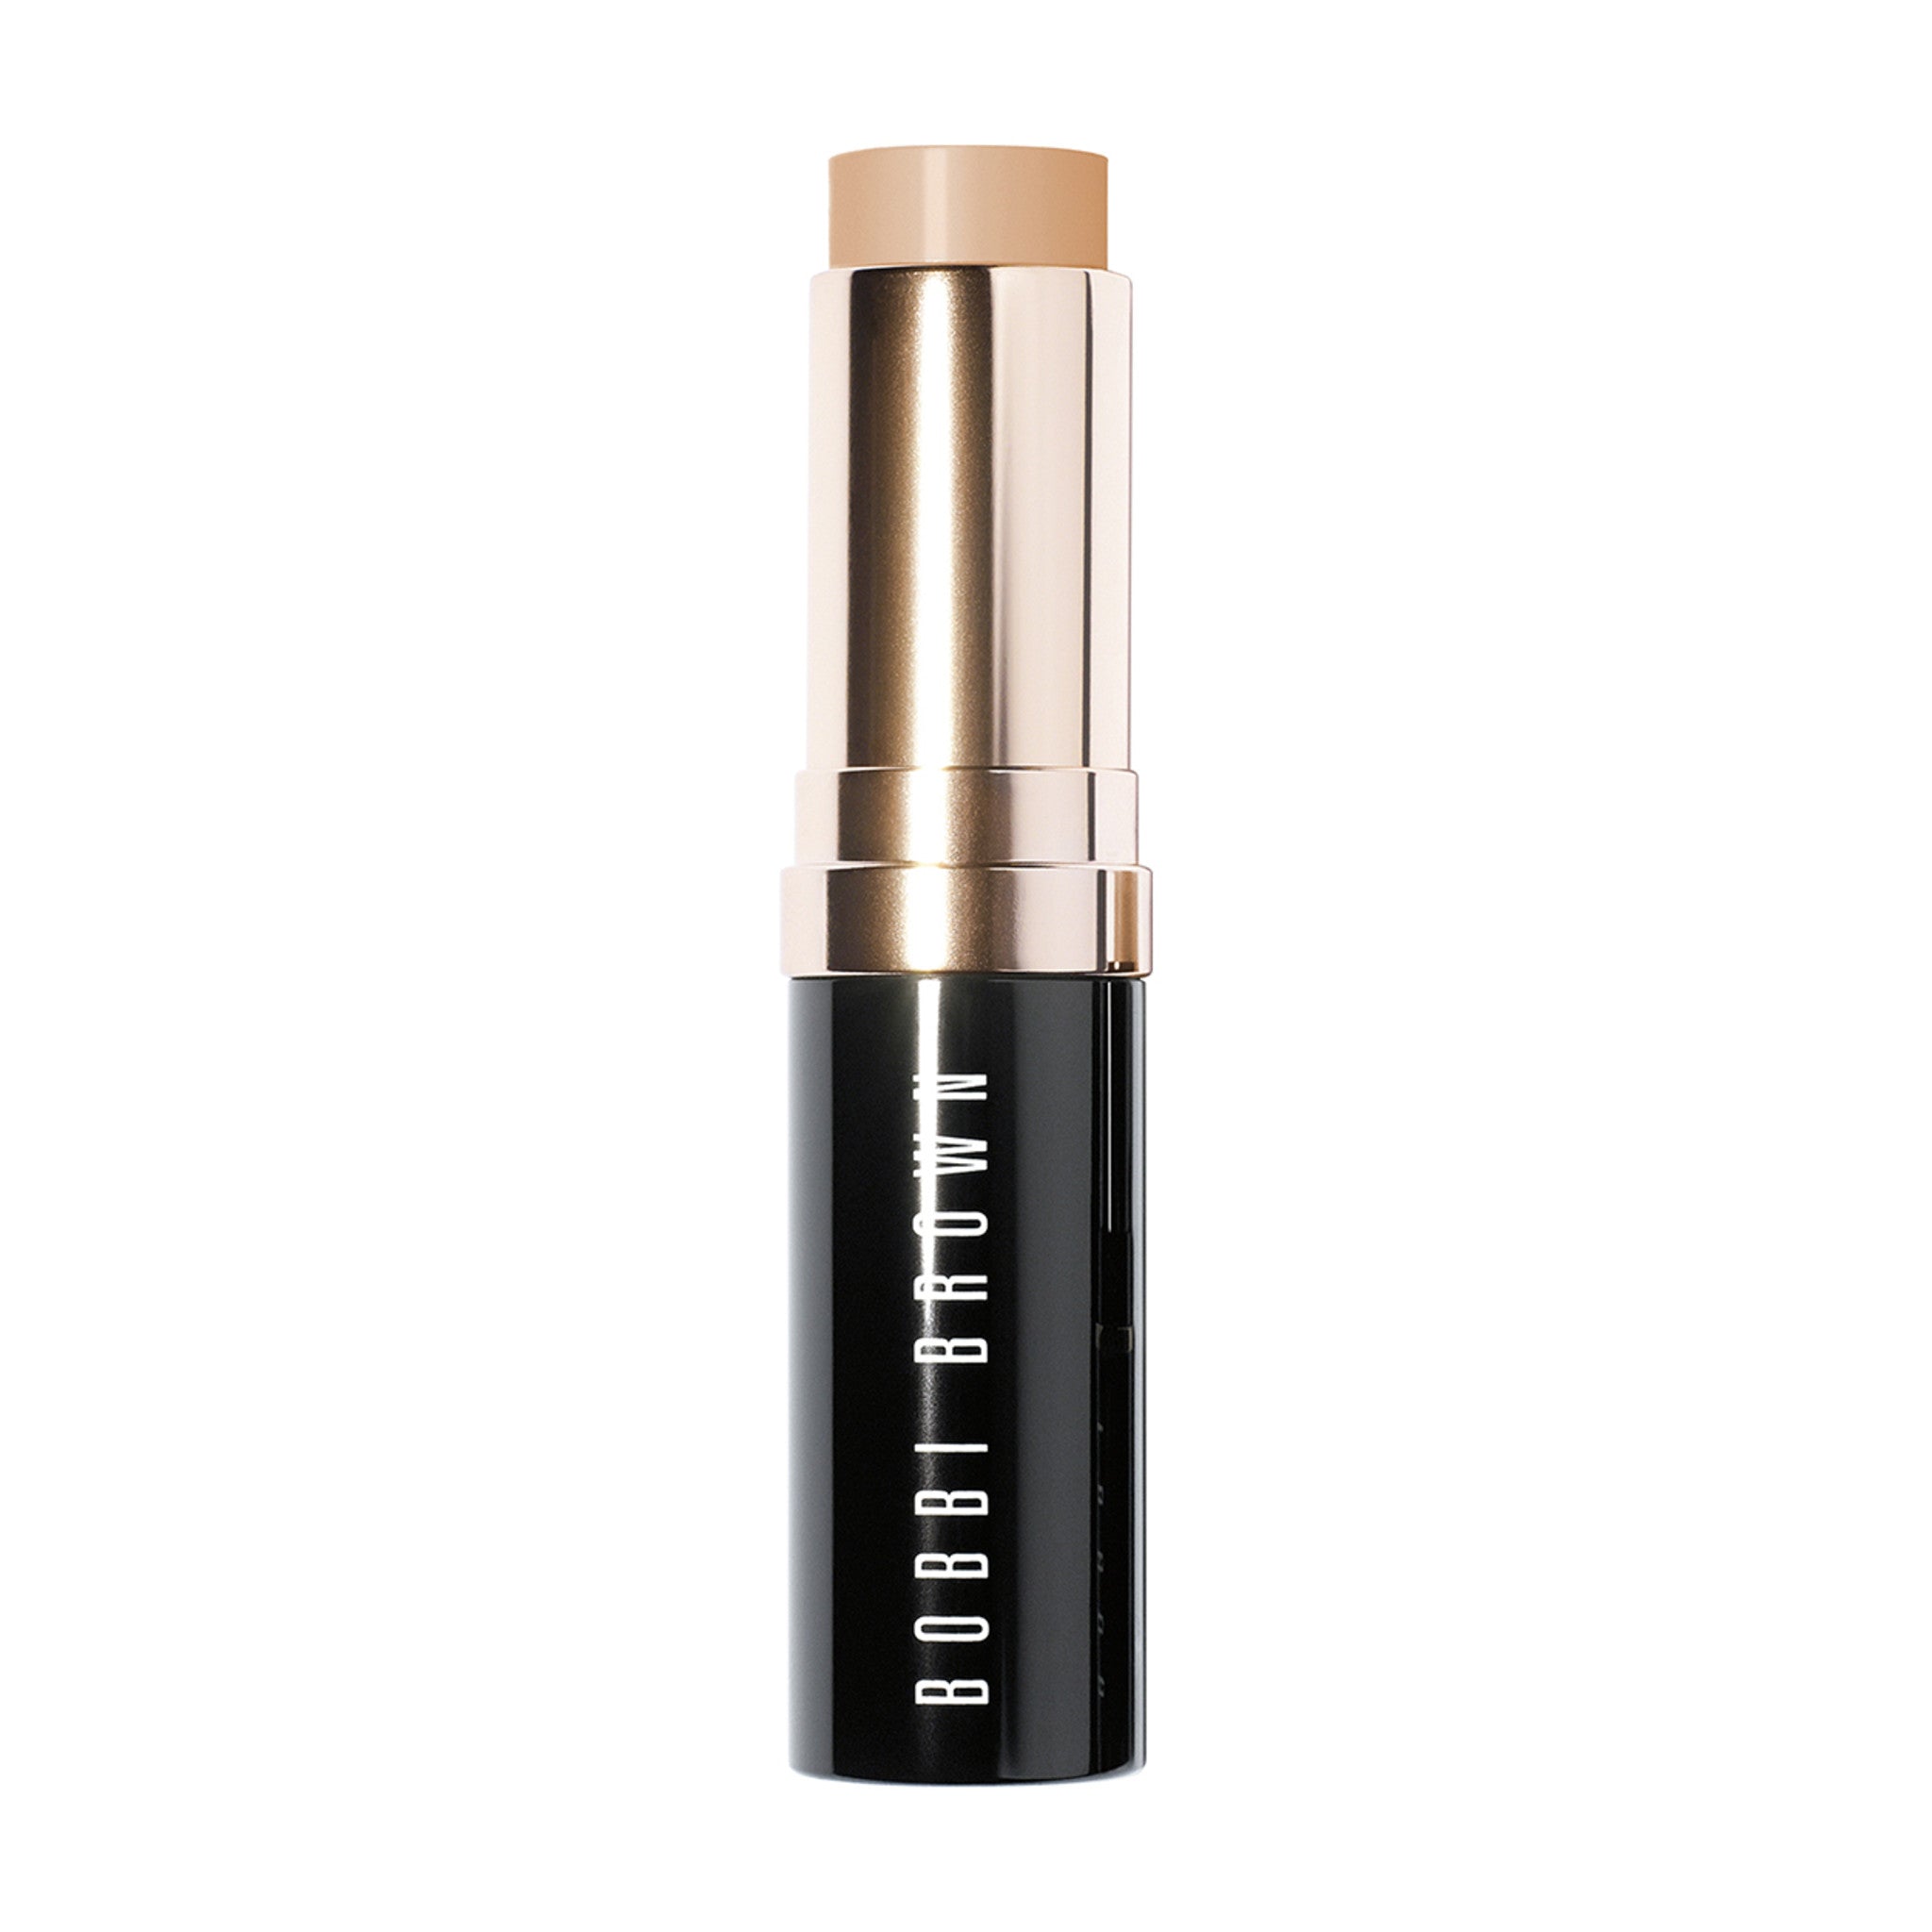 Bobbi Brown Skin Foundation Stick Color/Shade variant: Alabaster main image. This product is in the color nude, for light cool pink complexions